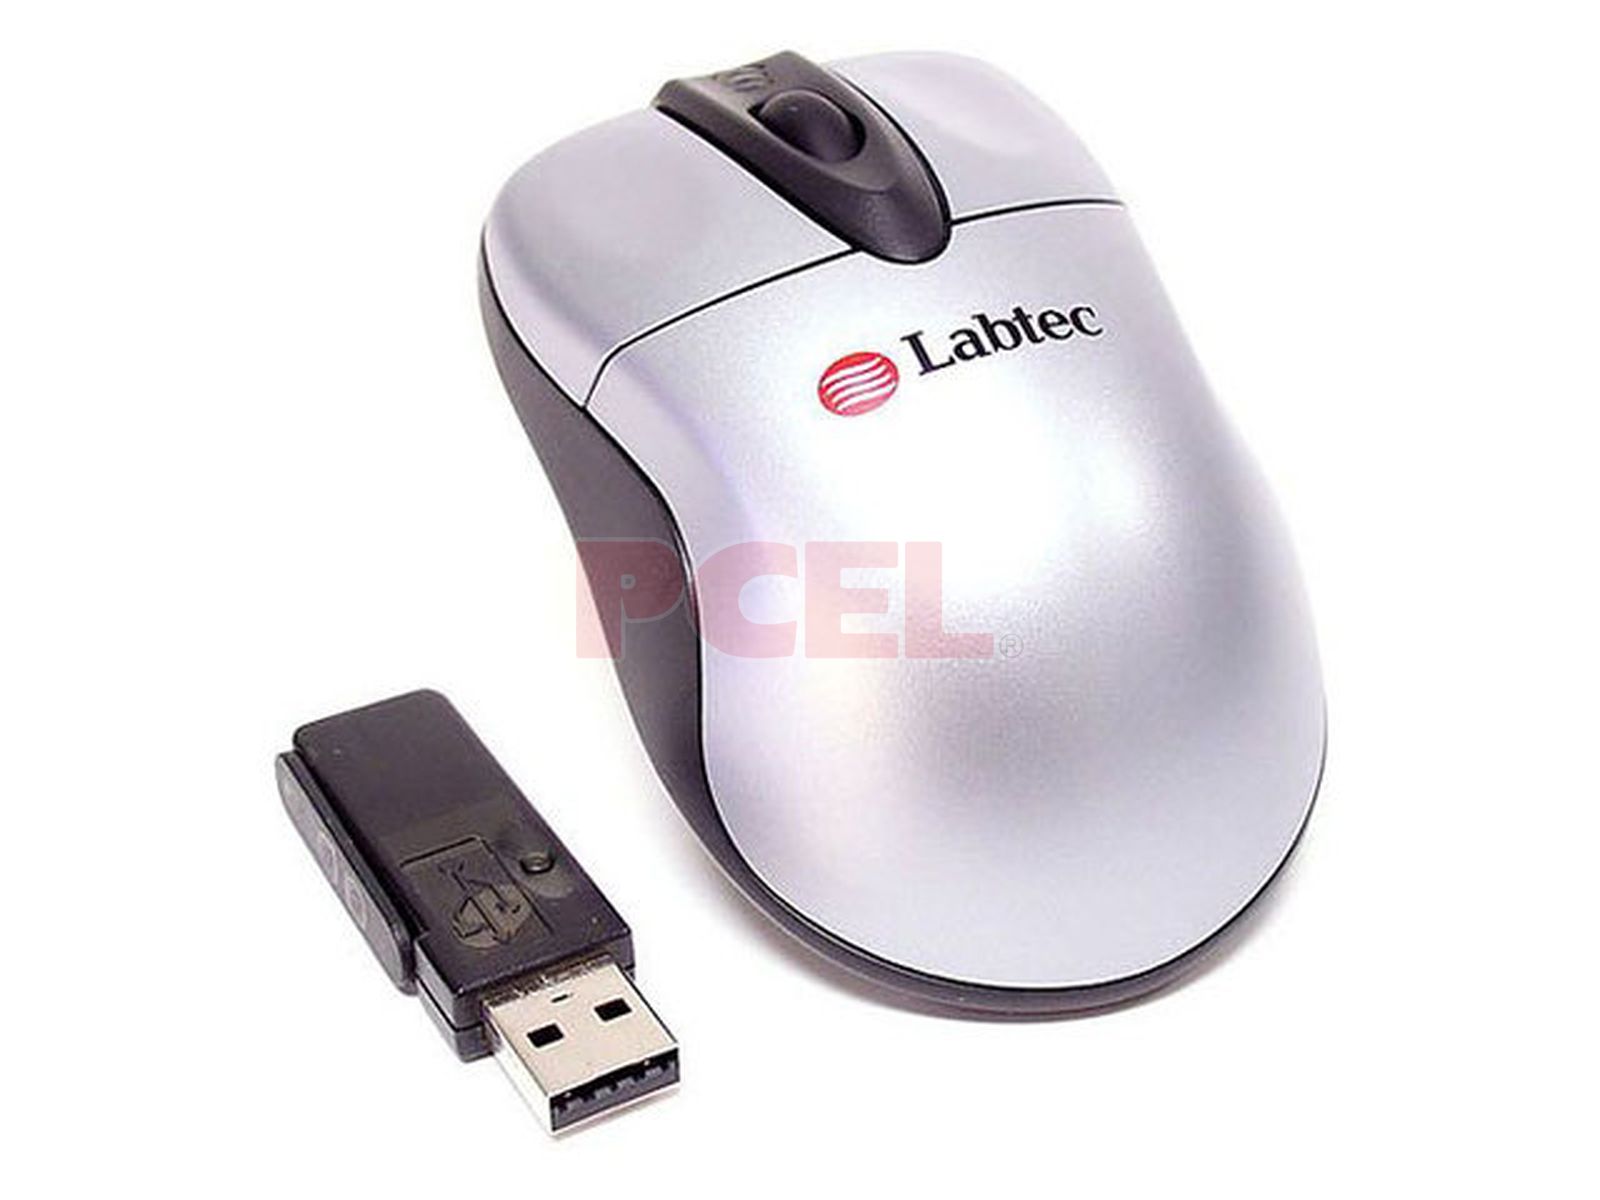 Labtec Notebook Optical Mouse Pro. Мышь Labtec Wireless Mouse 953228-0914 Blue PS/2. Wireless Mouse драйвер. USB wired Optical Mouse PF_b4903.